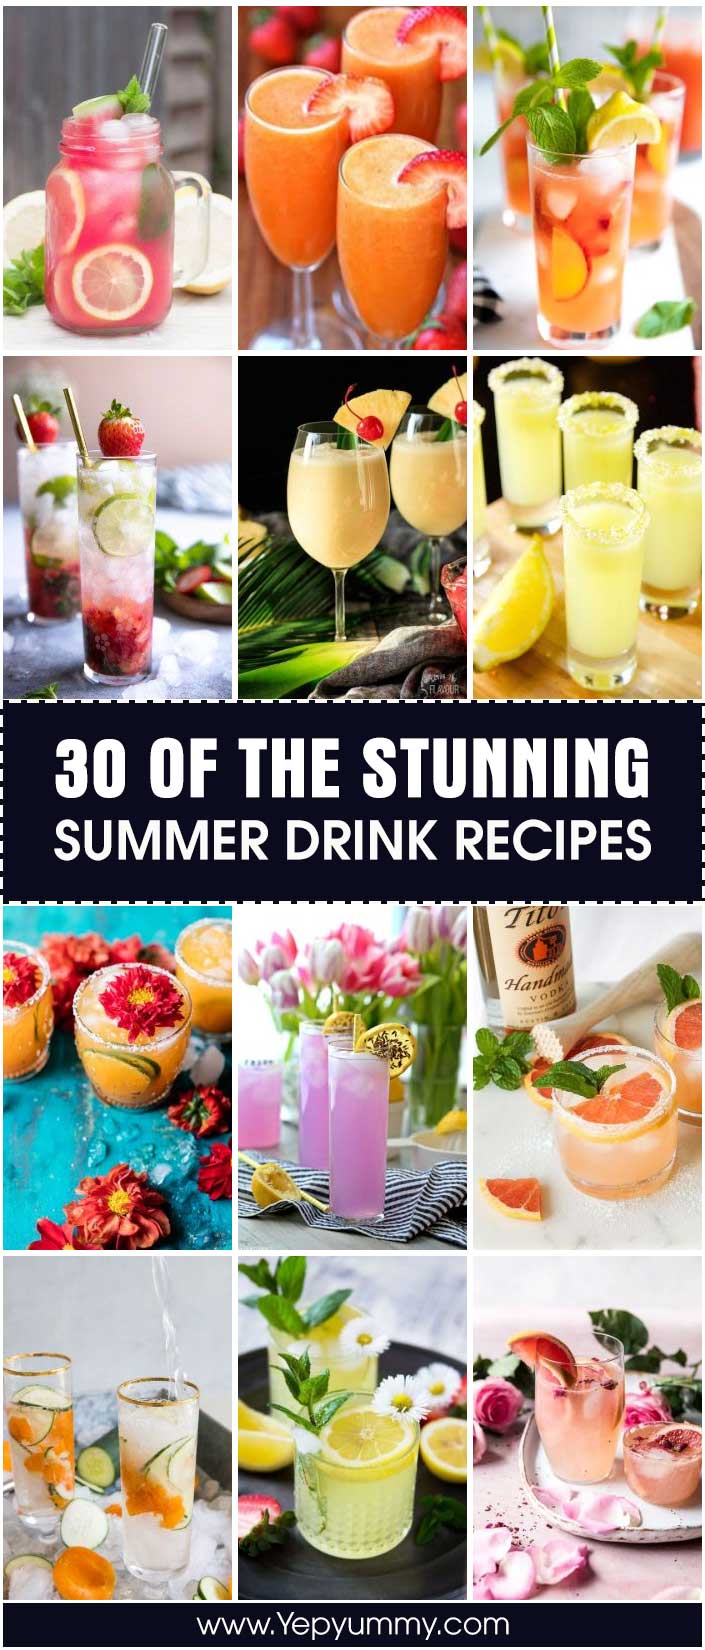 30 Of The Stunning Summer Drink Recipes